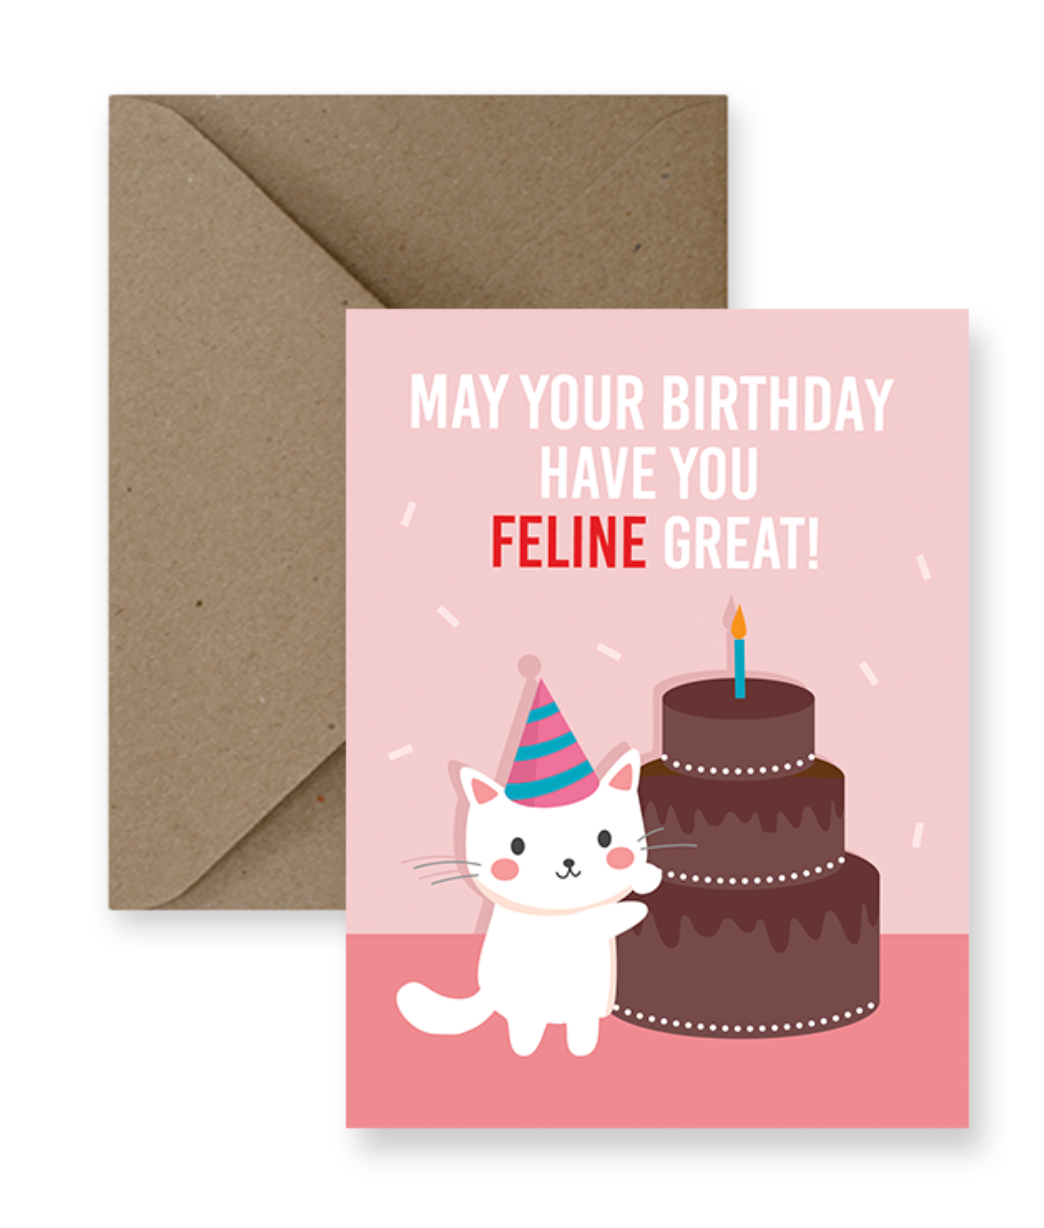 “May Your Birthday Have You Feline Great”